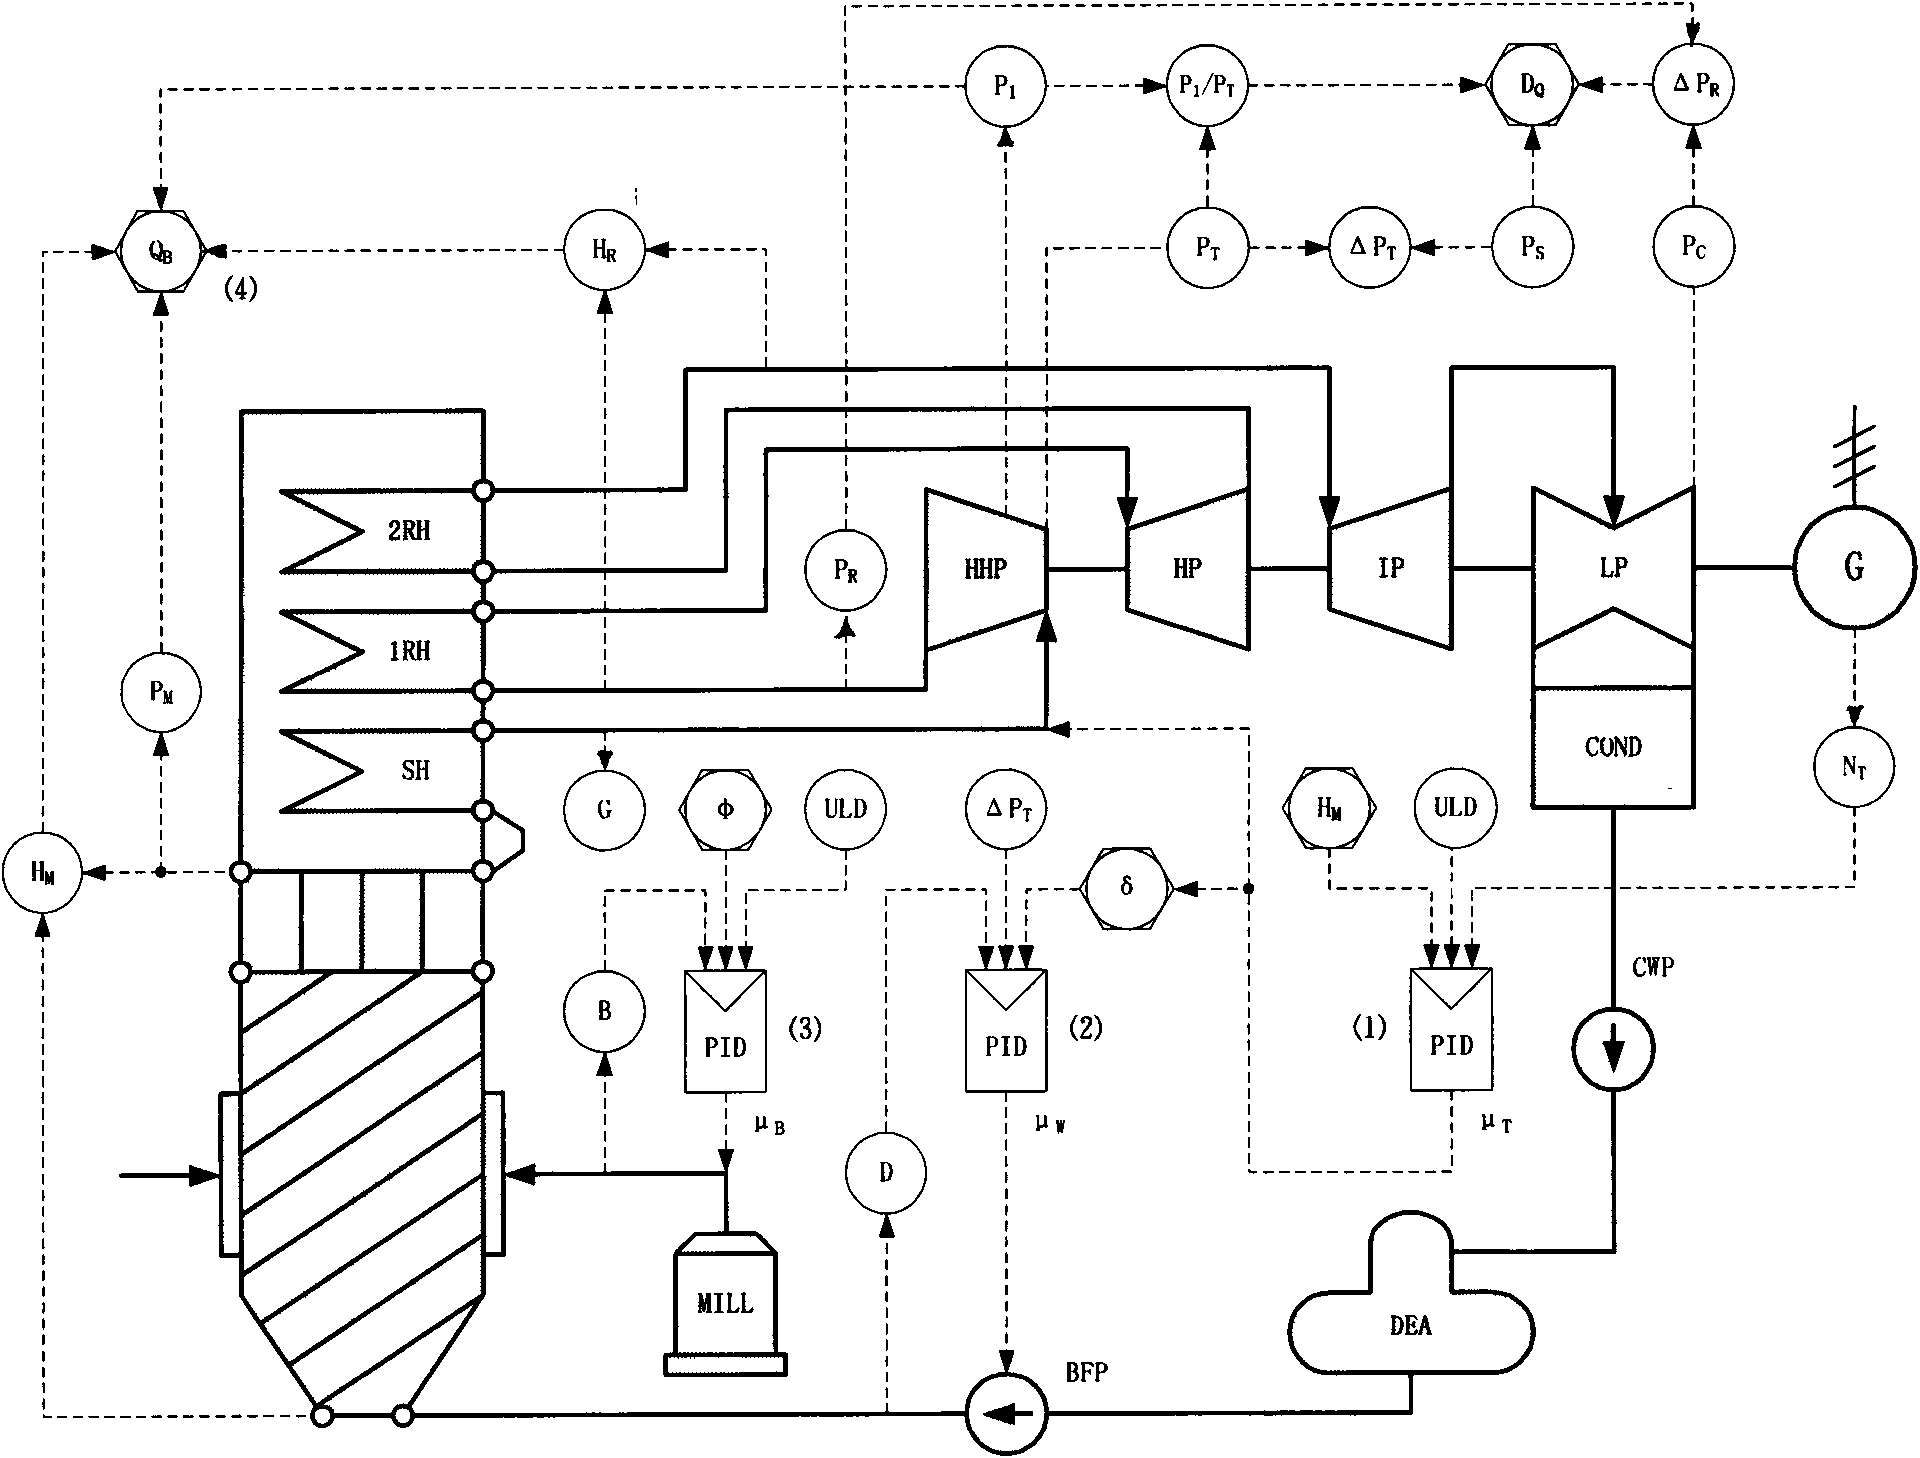 DBC (double direct energy and quality balance coordinated control system) of secondary reheating uniflow boiler-steam turbine